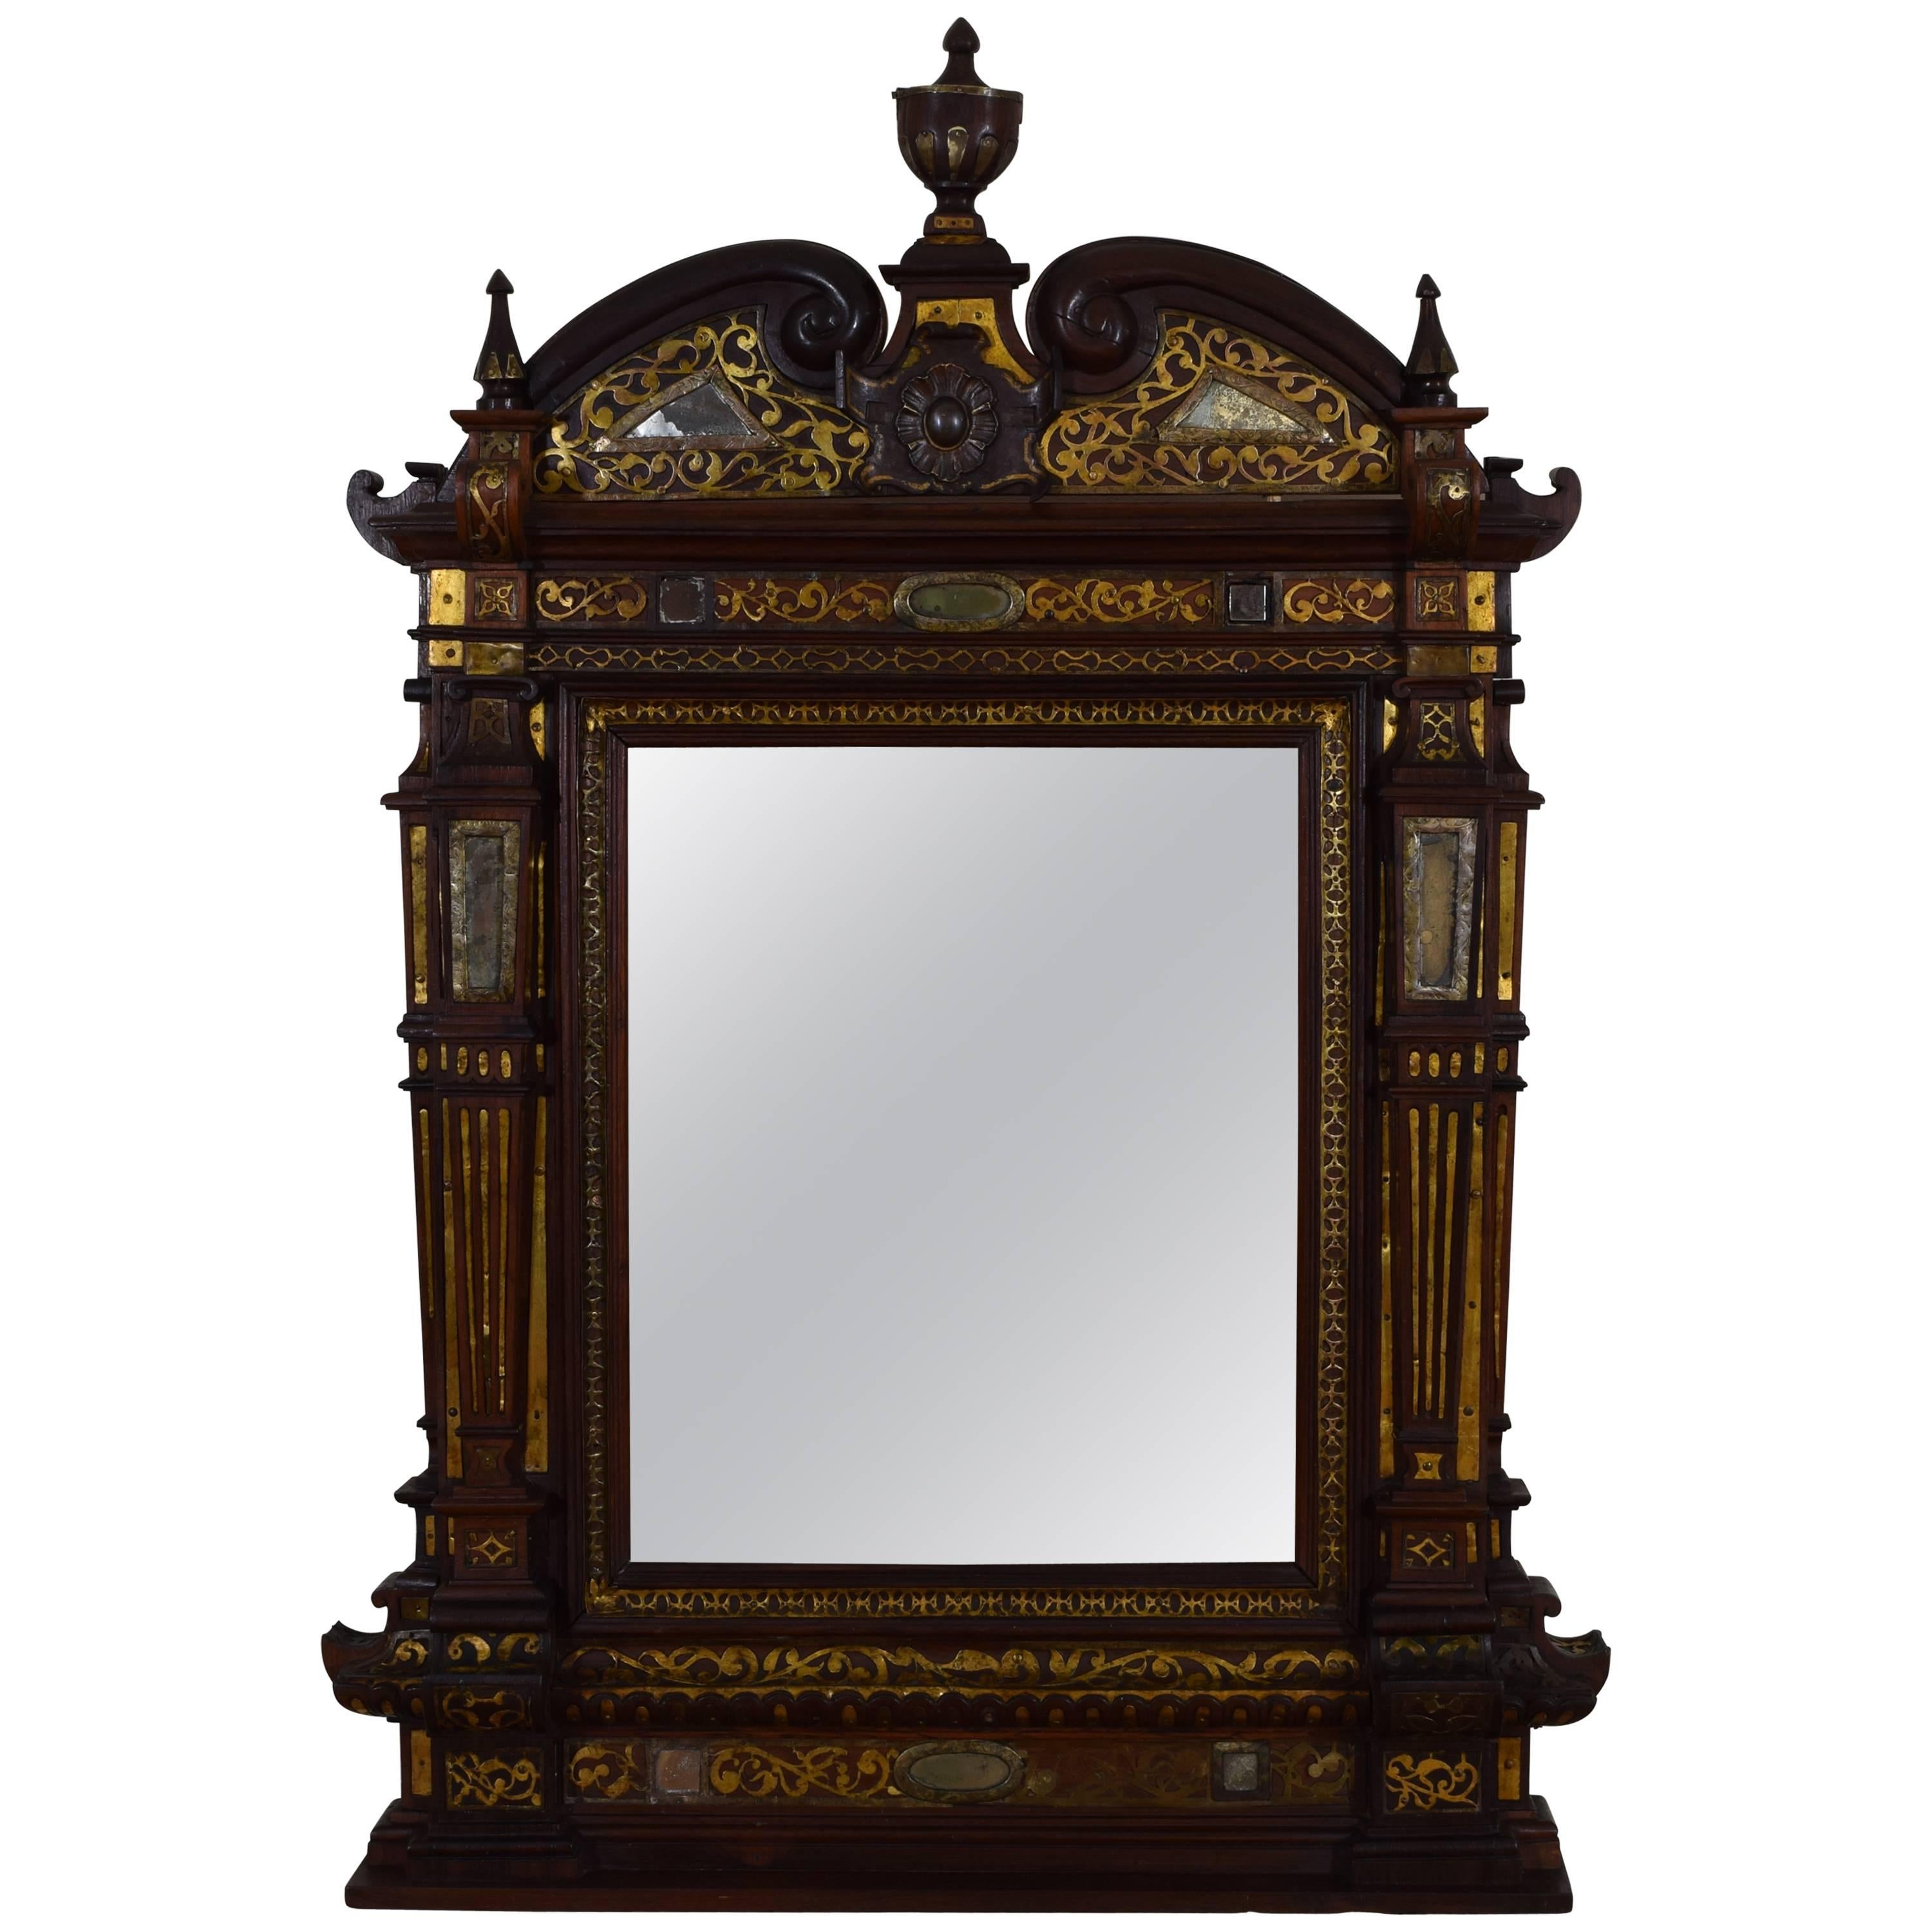 Italian, Probably Venice, Rosewood and Brass Decorated Mirror, 19th Century